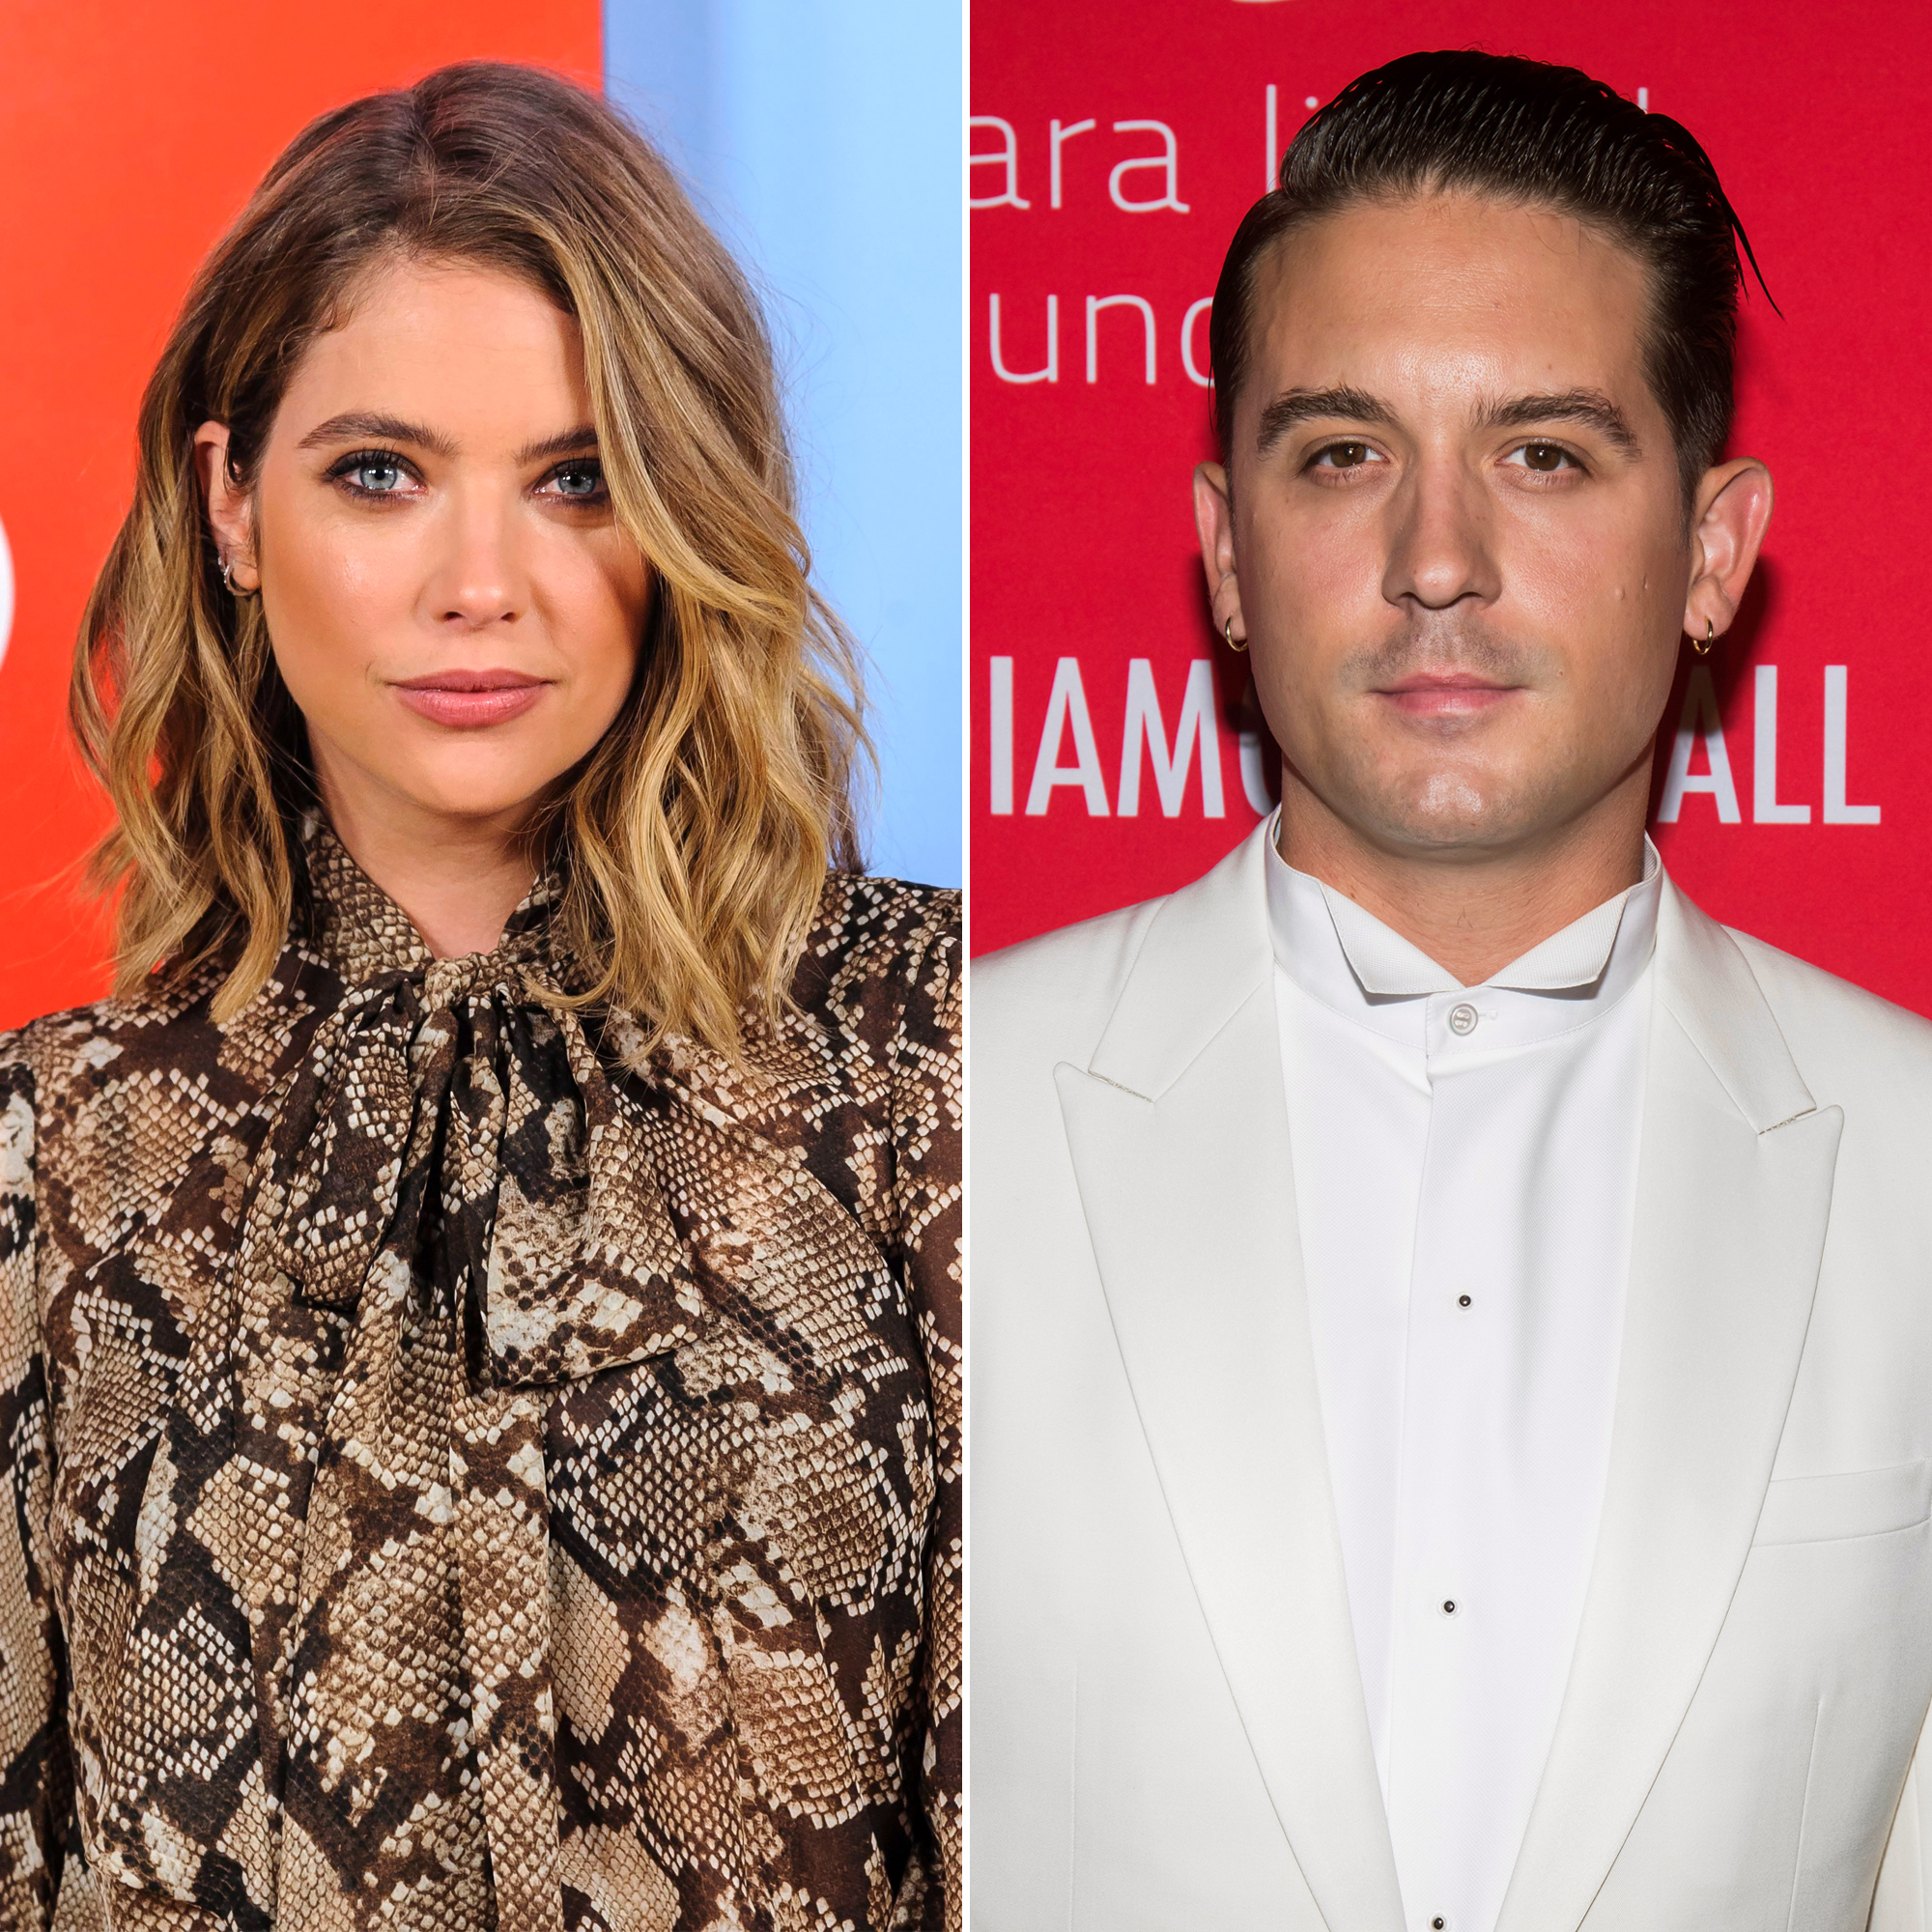 https://www.usmagazine.com/wp-content/uploads/2020/11/Ashley-Benson-and-G-Eazy-Whirlwind-Romance-From-Musical-Collaborators-to-Dating-01.jpg?quality=40&strip=all